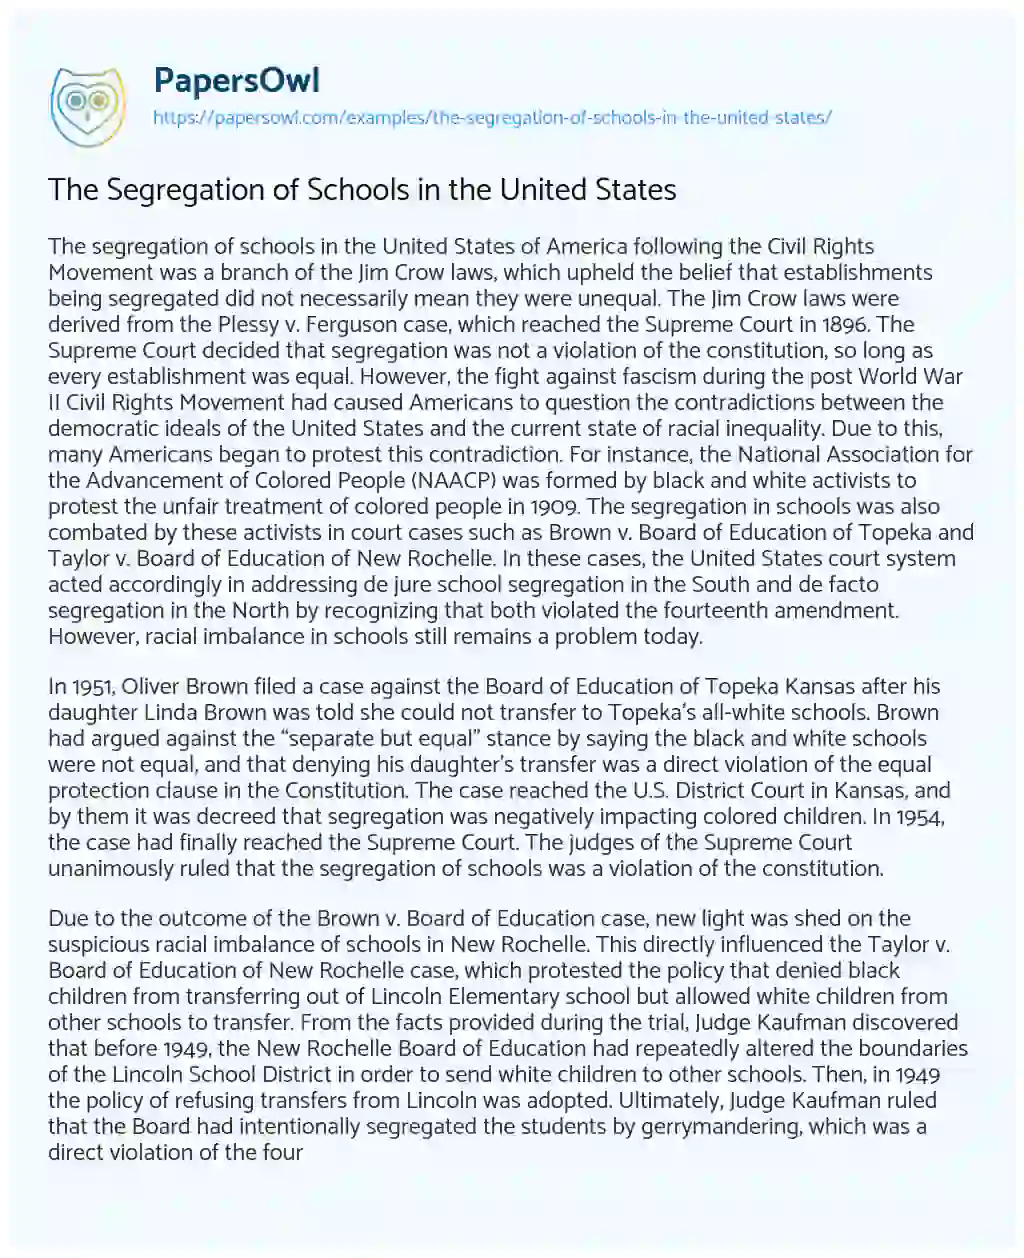 Essay on The Segregation of Schools in the United States